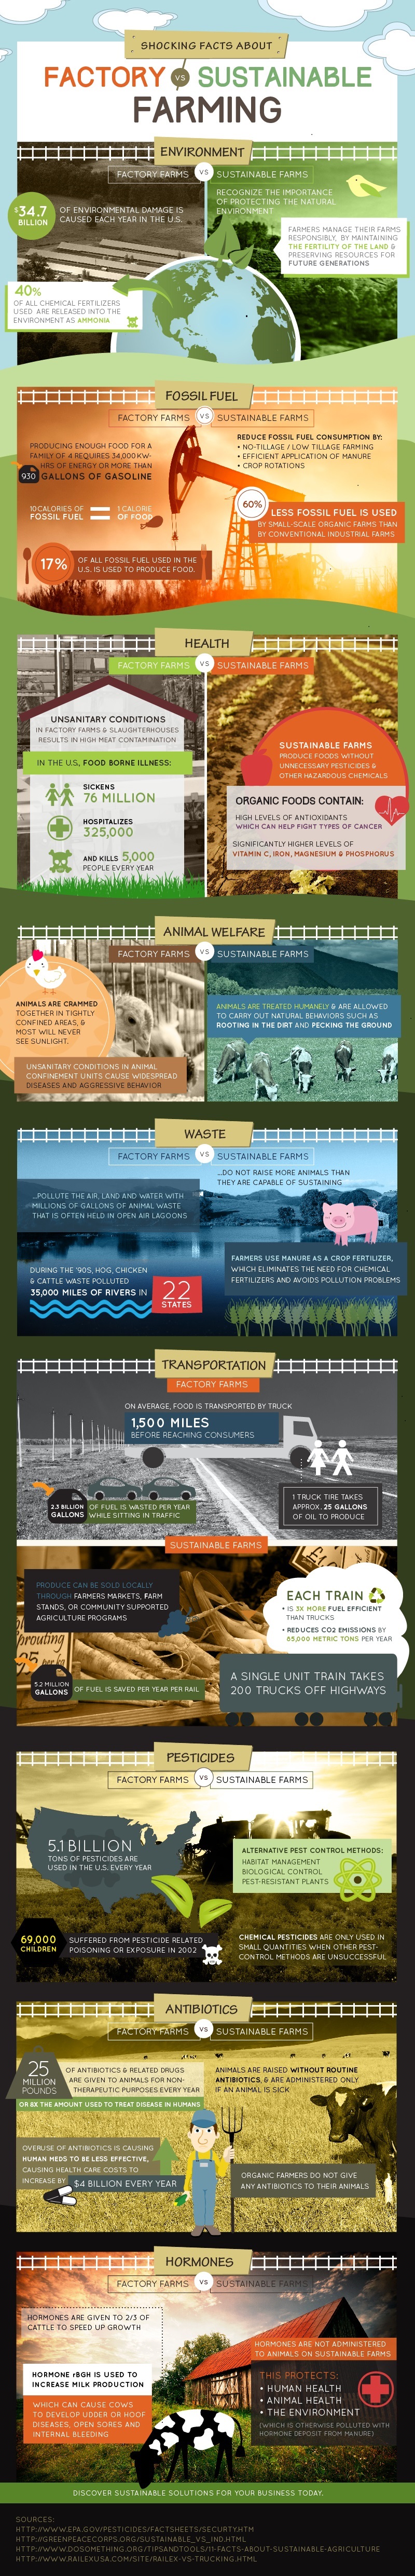 Shocking Facts About Factory Farming vs. Sustainable Farming